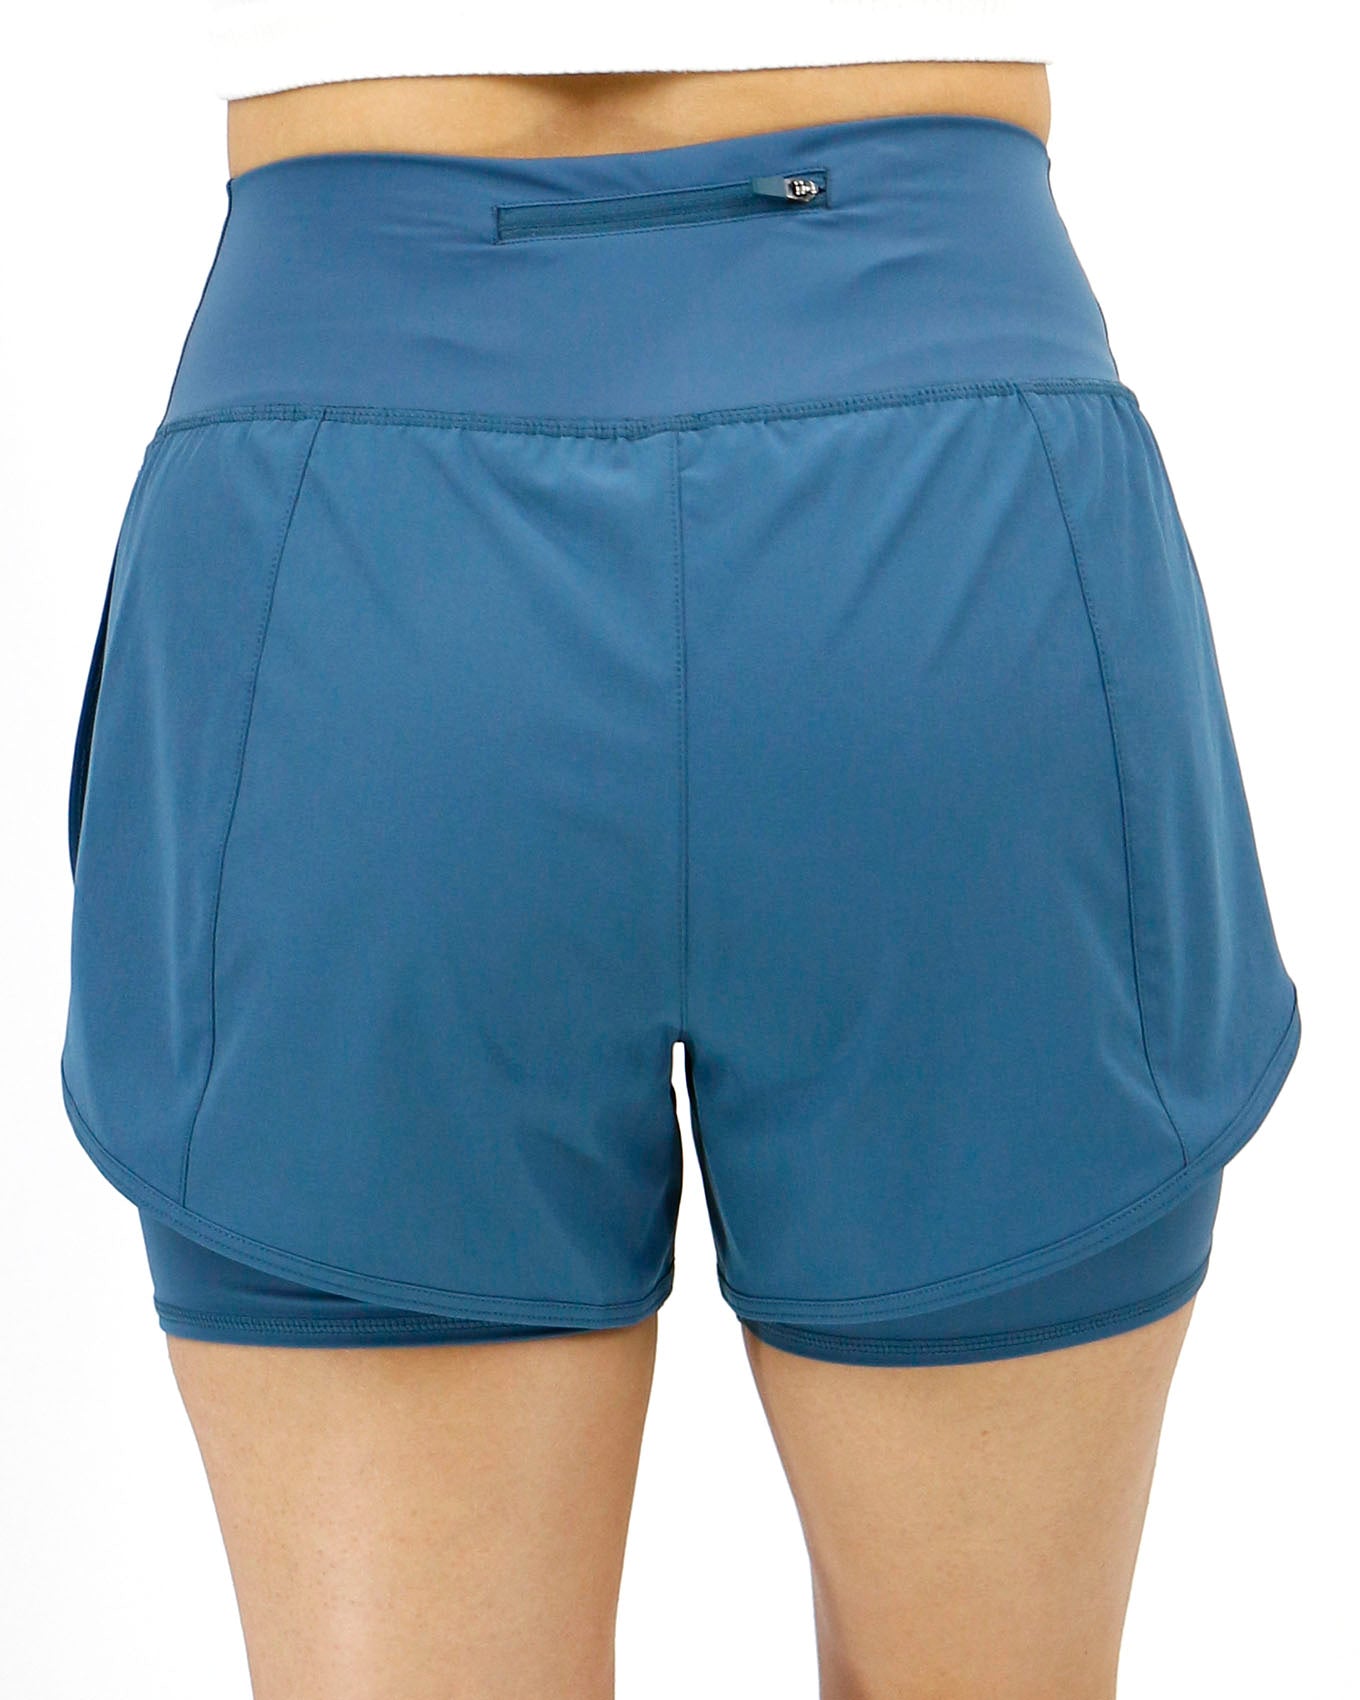 Everyday Blue Heron Athletic Shorts - Grace and Lace